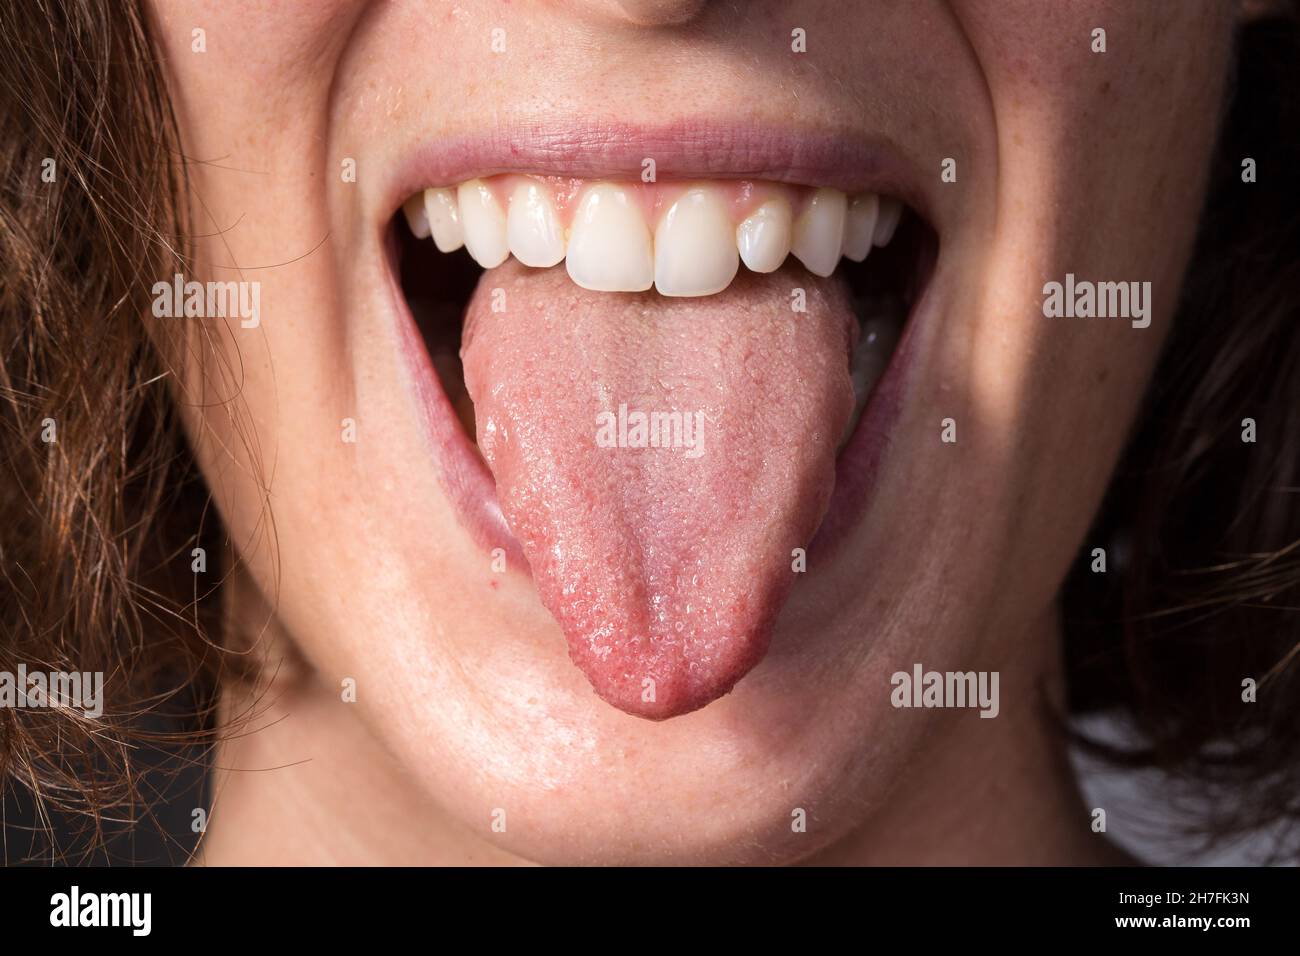 Girl on a check visit to detect candidiasis on tongue Stock Photo